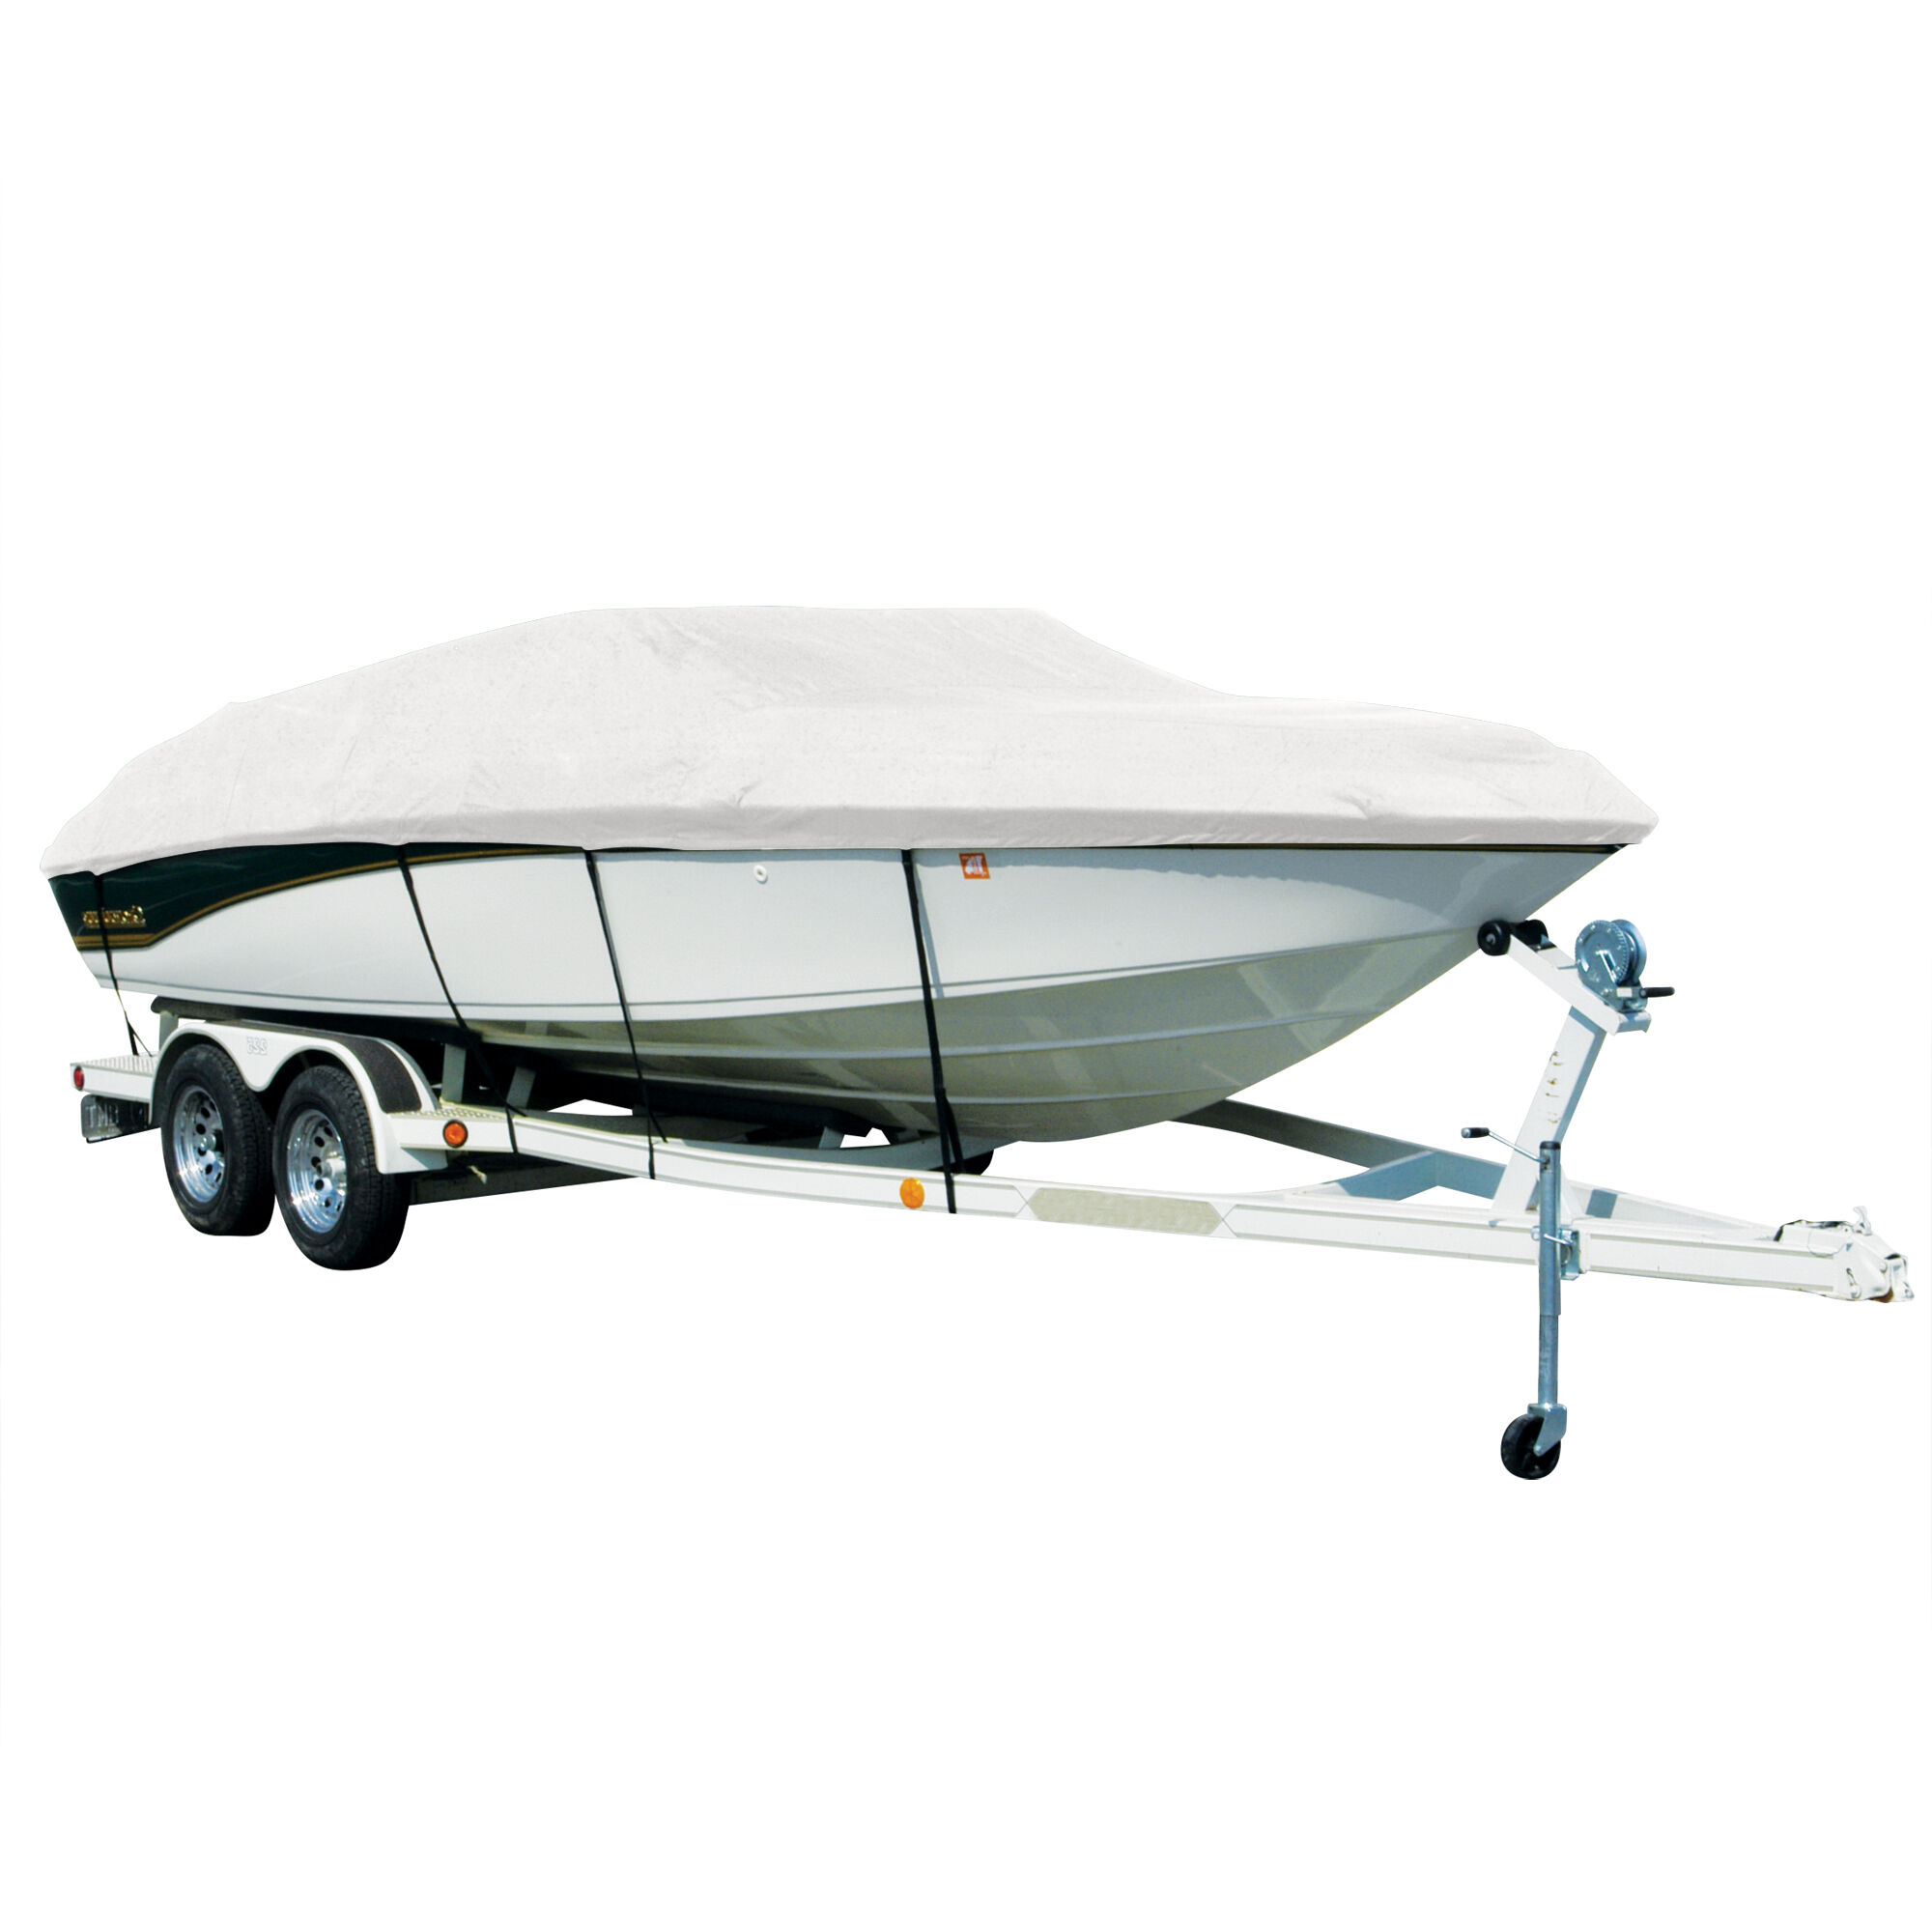 Covermate Sharkskin Plus Exact-Fit Cover for Procraft 200 200 Side Console w/ Shield w/ Port Trolling Motor O/B. White